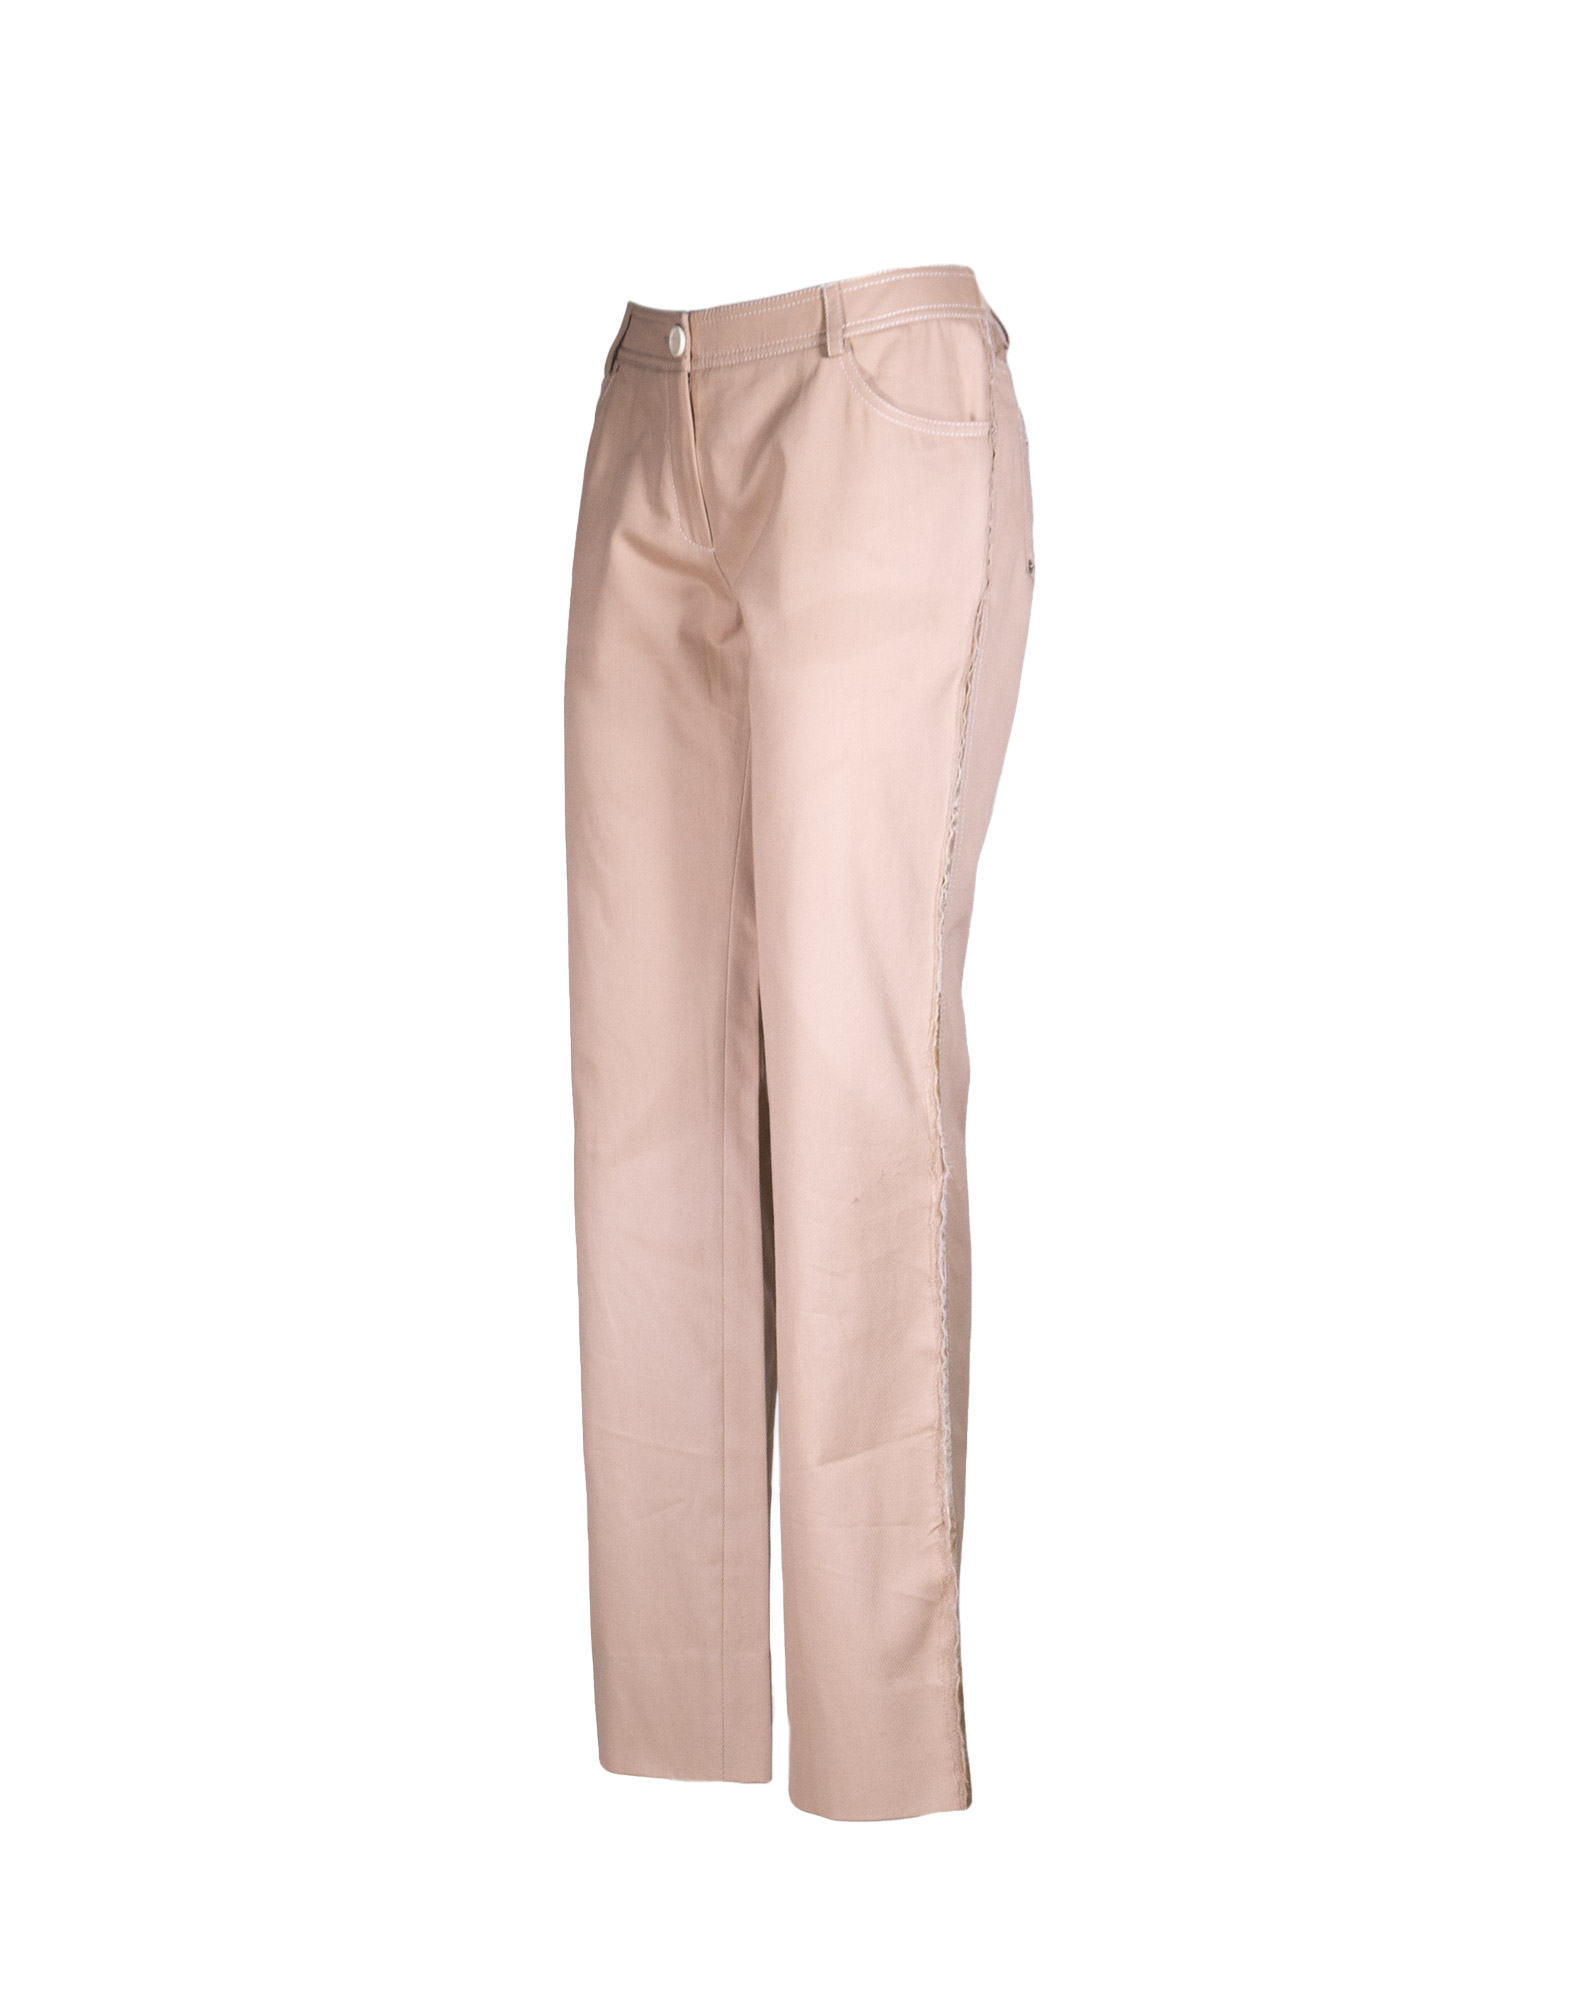 Christian Dior Boutique - 2000s flare pants